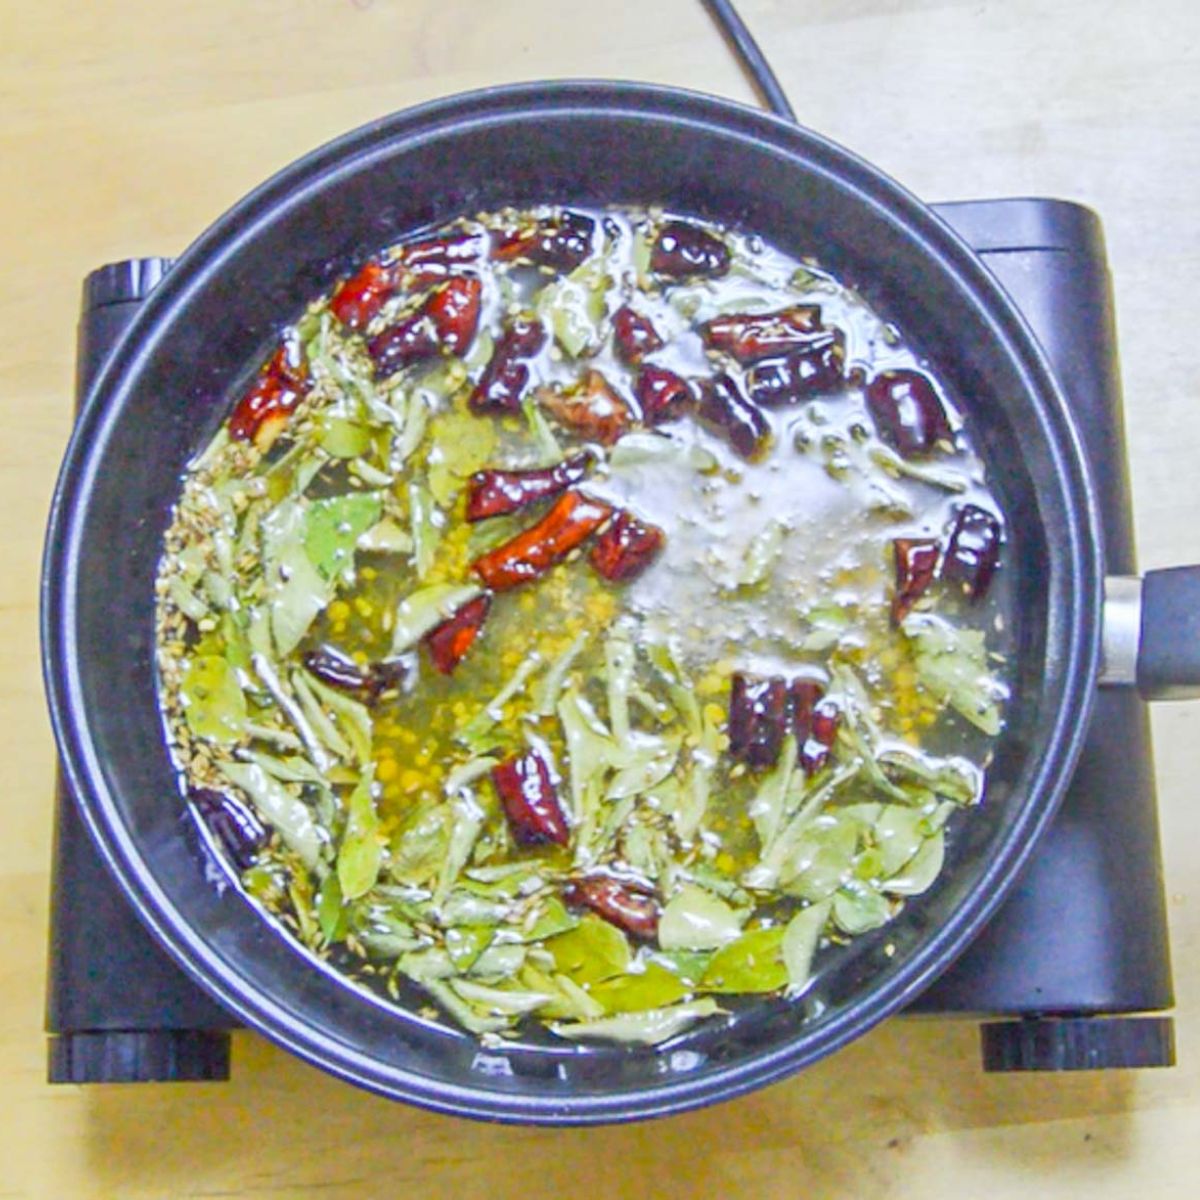 tempering spices in a black pan.